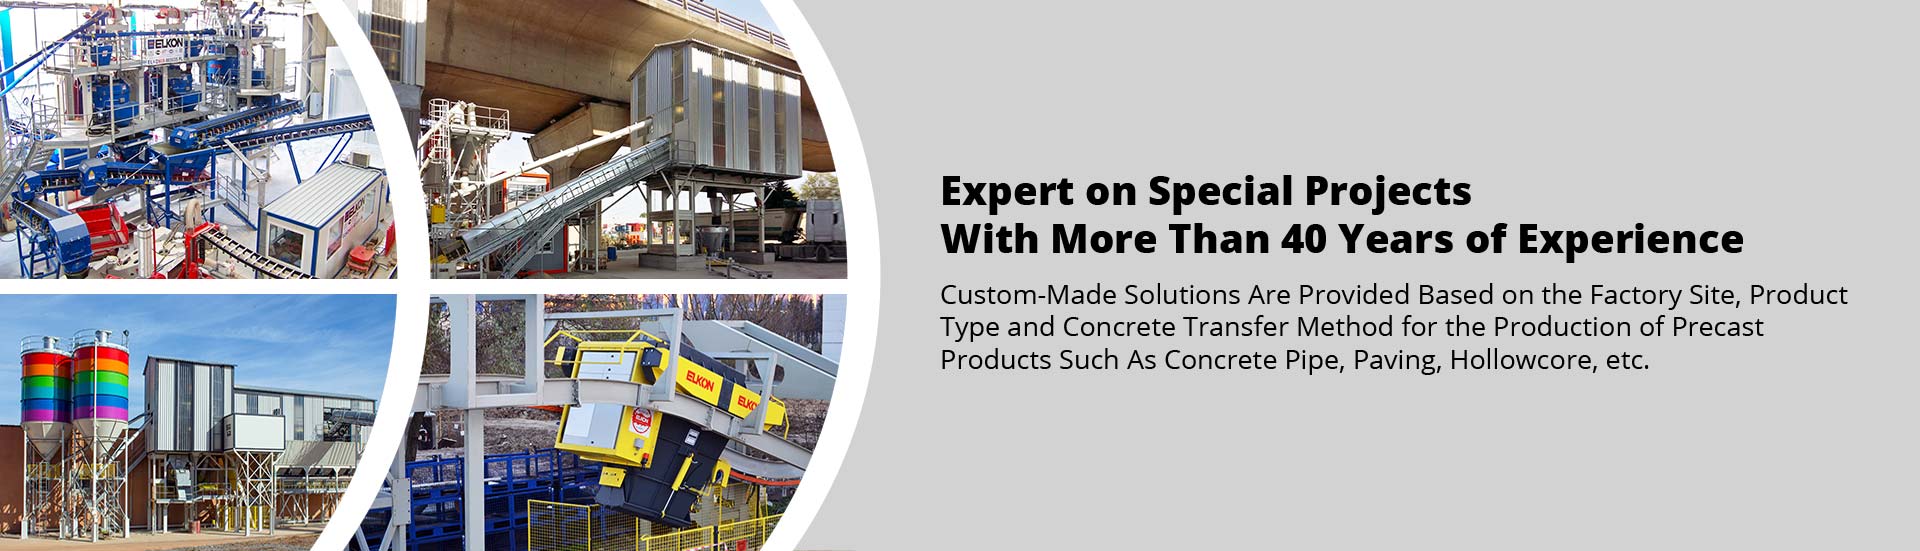 Expert on Special Projects With More Than 40 Years of Experience